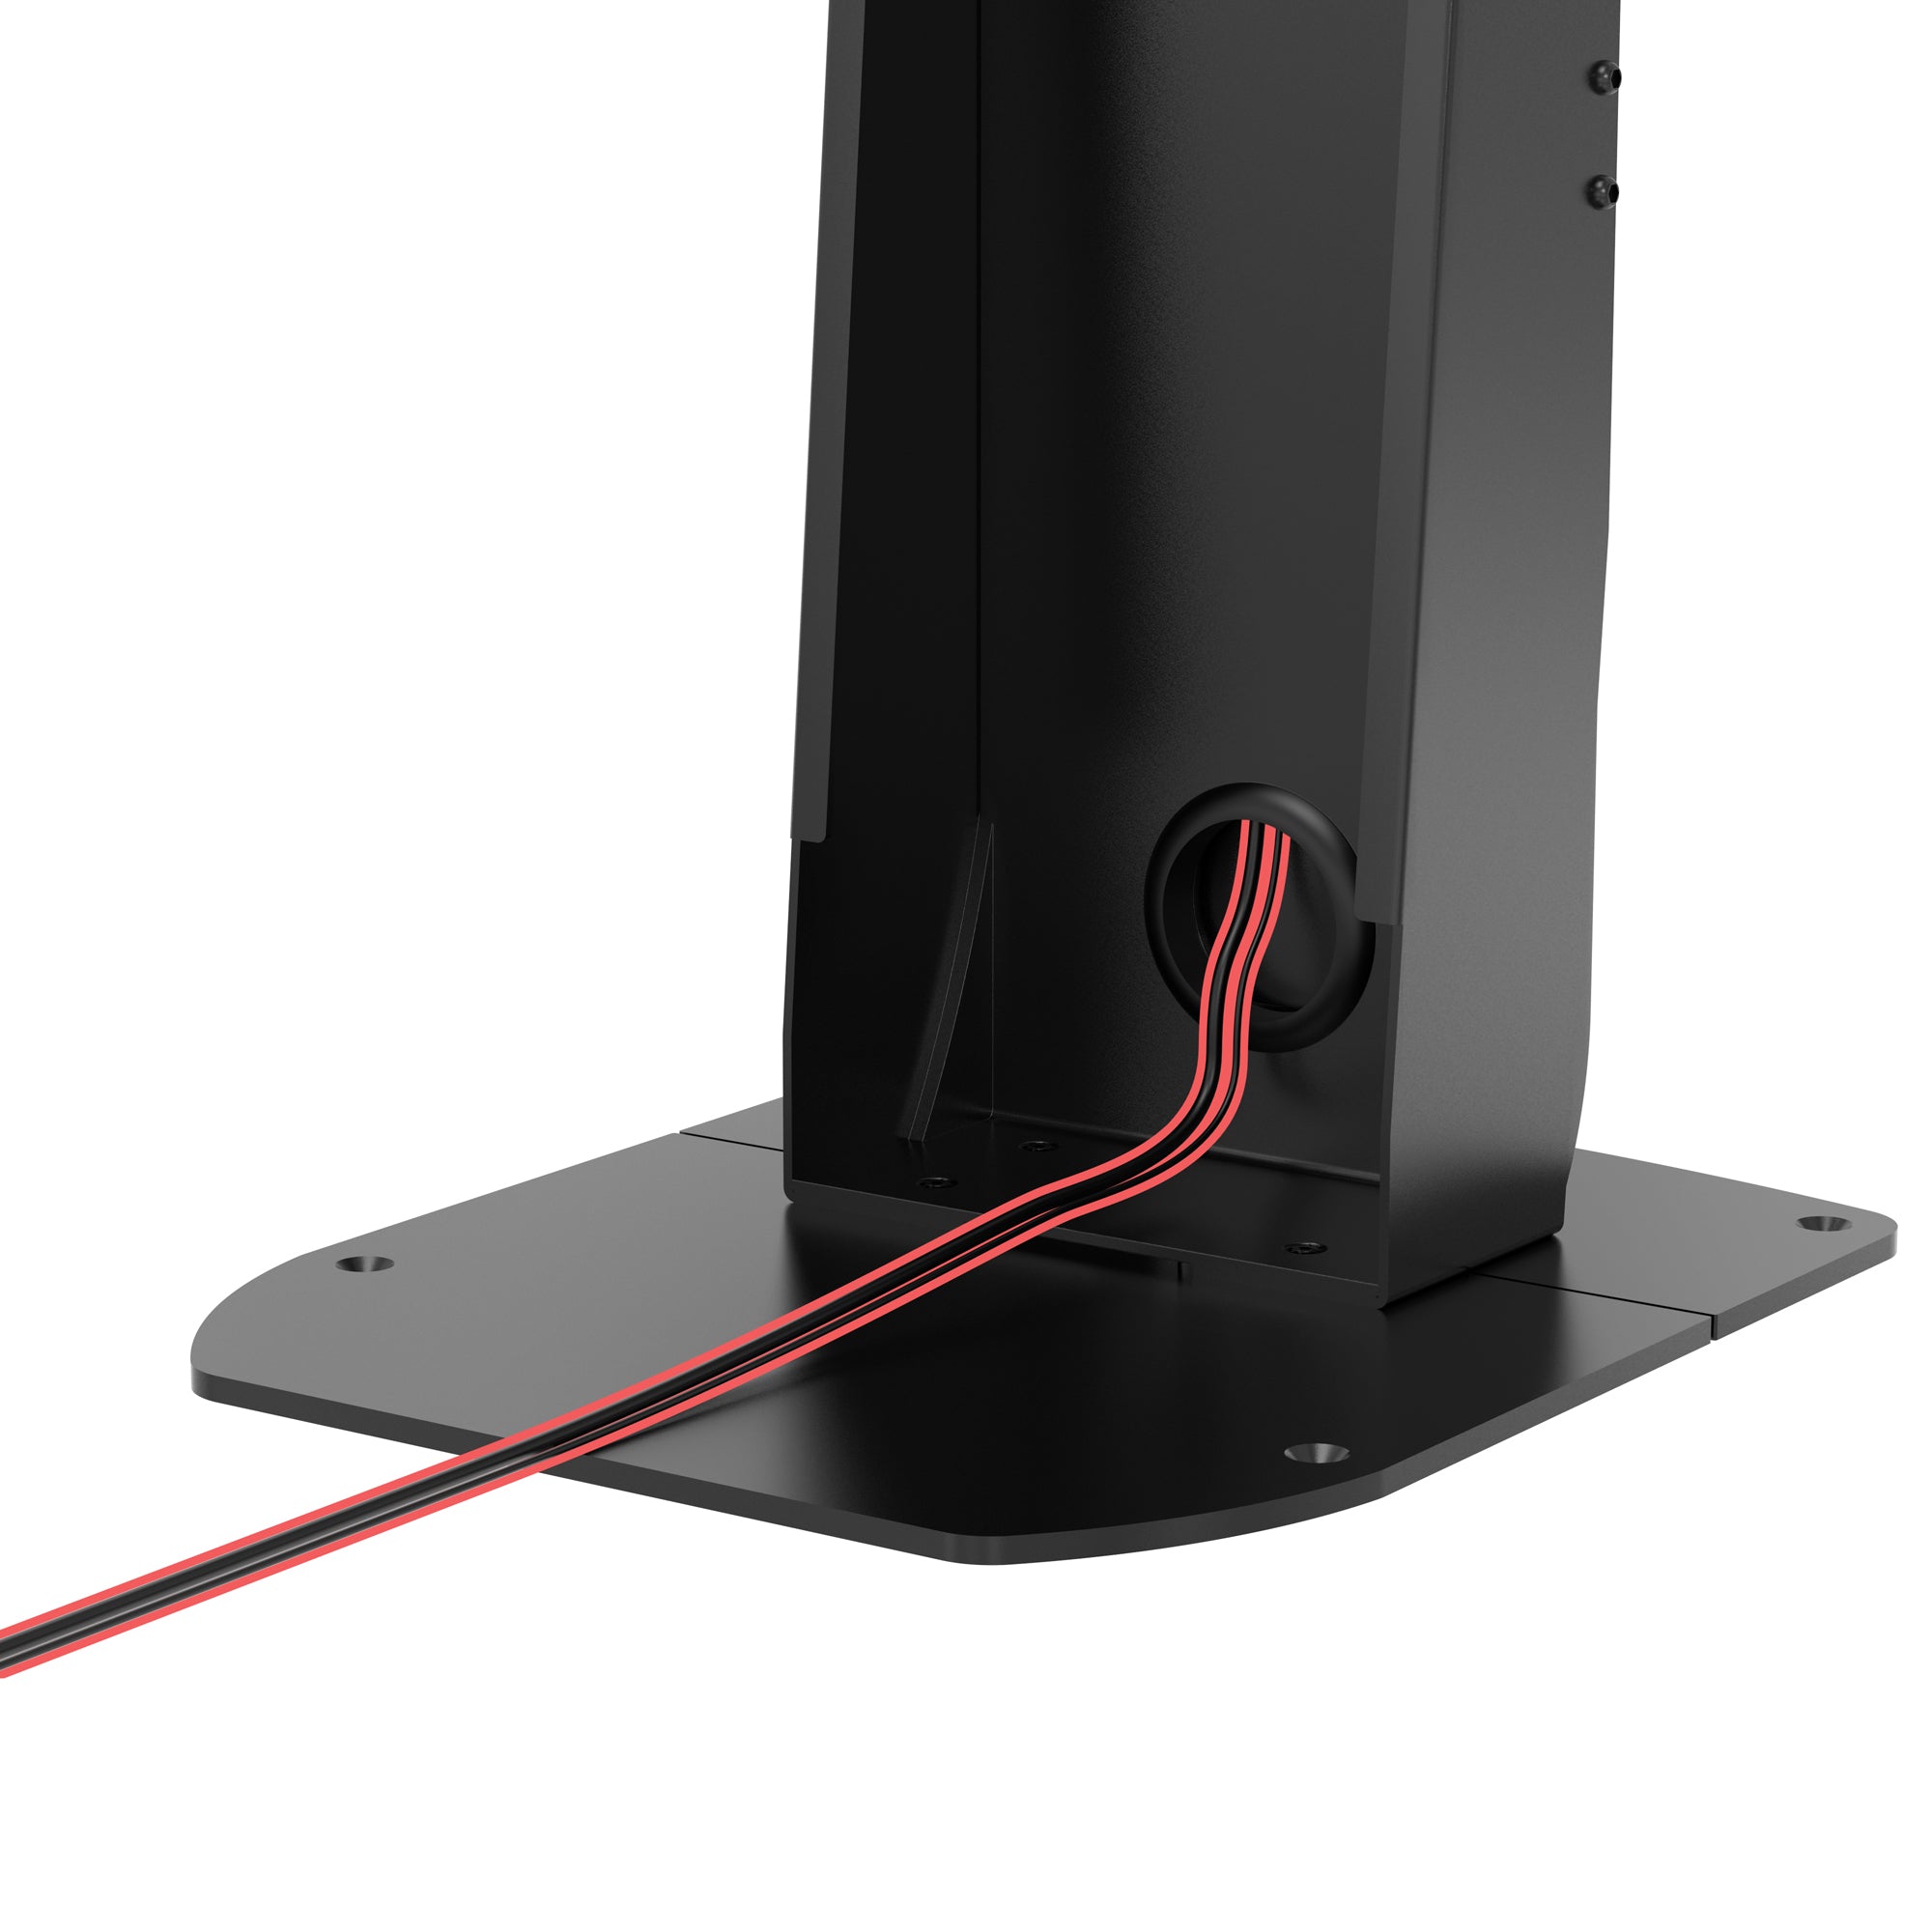 Premium Floor Stand for Monitors Up 32"